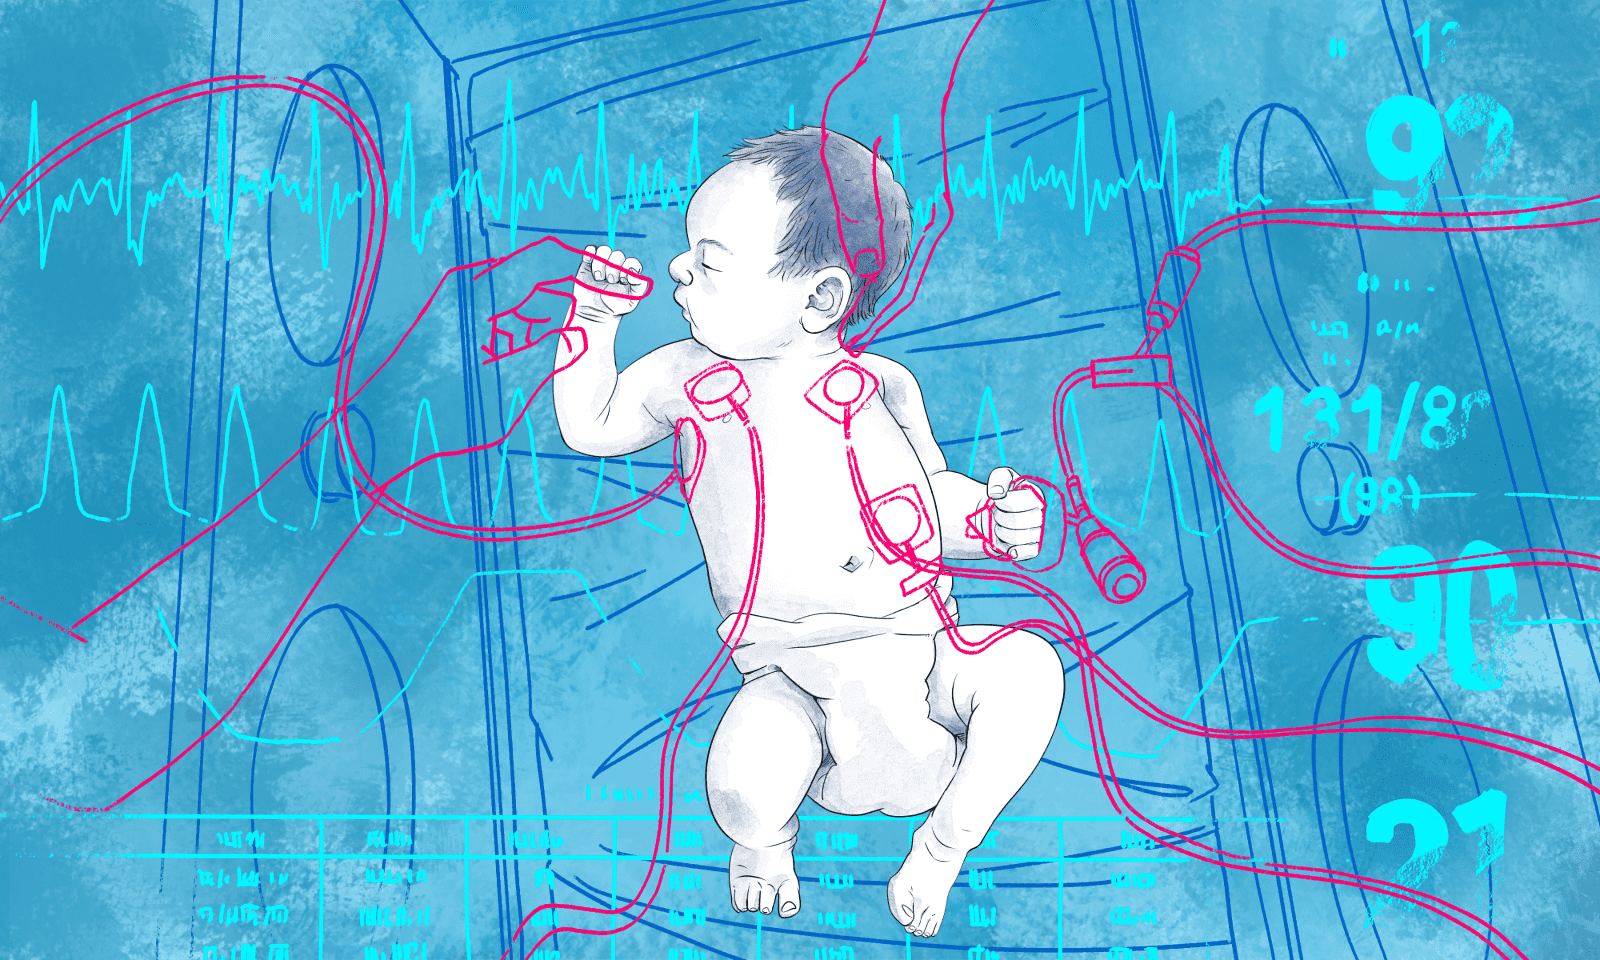 Illustration of a newborn baby patient with medical sensors and tubes on his body.